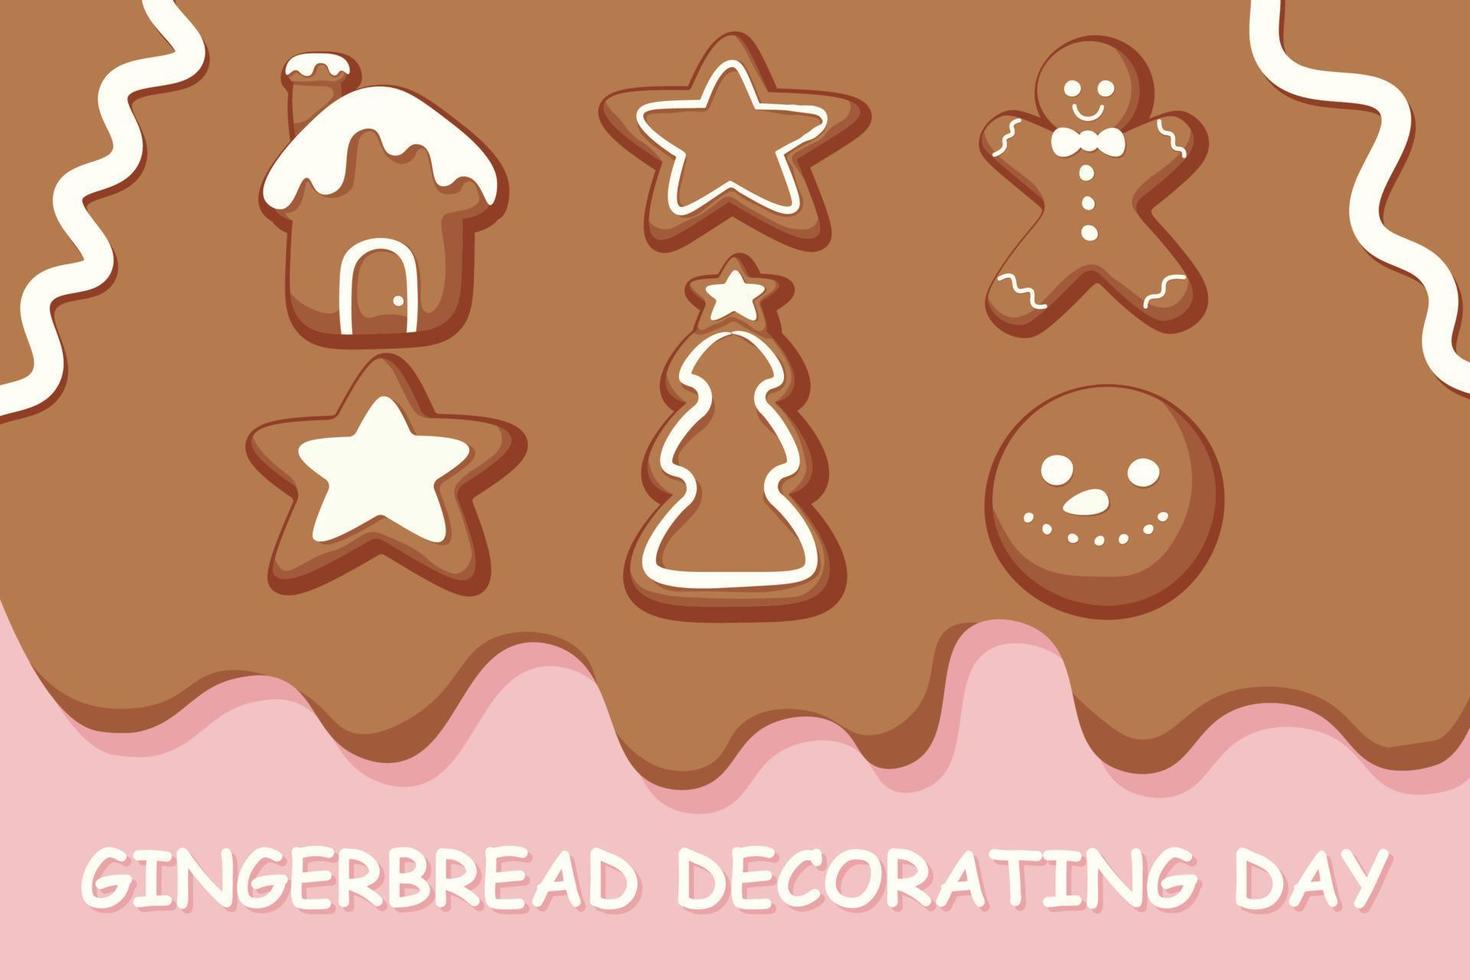 Gingerbread Decorating Day background. vector